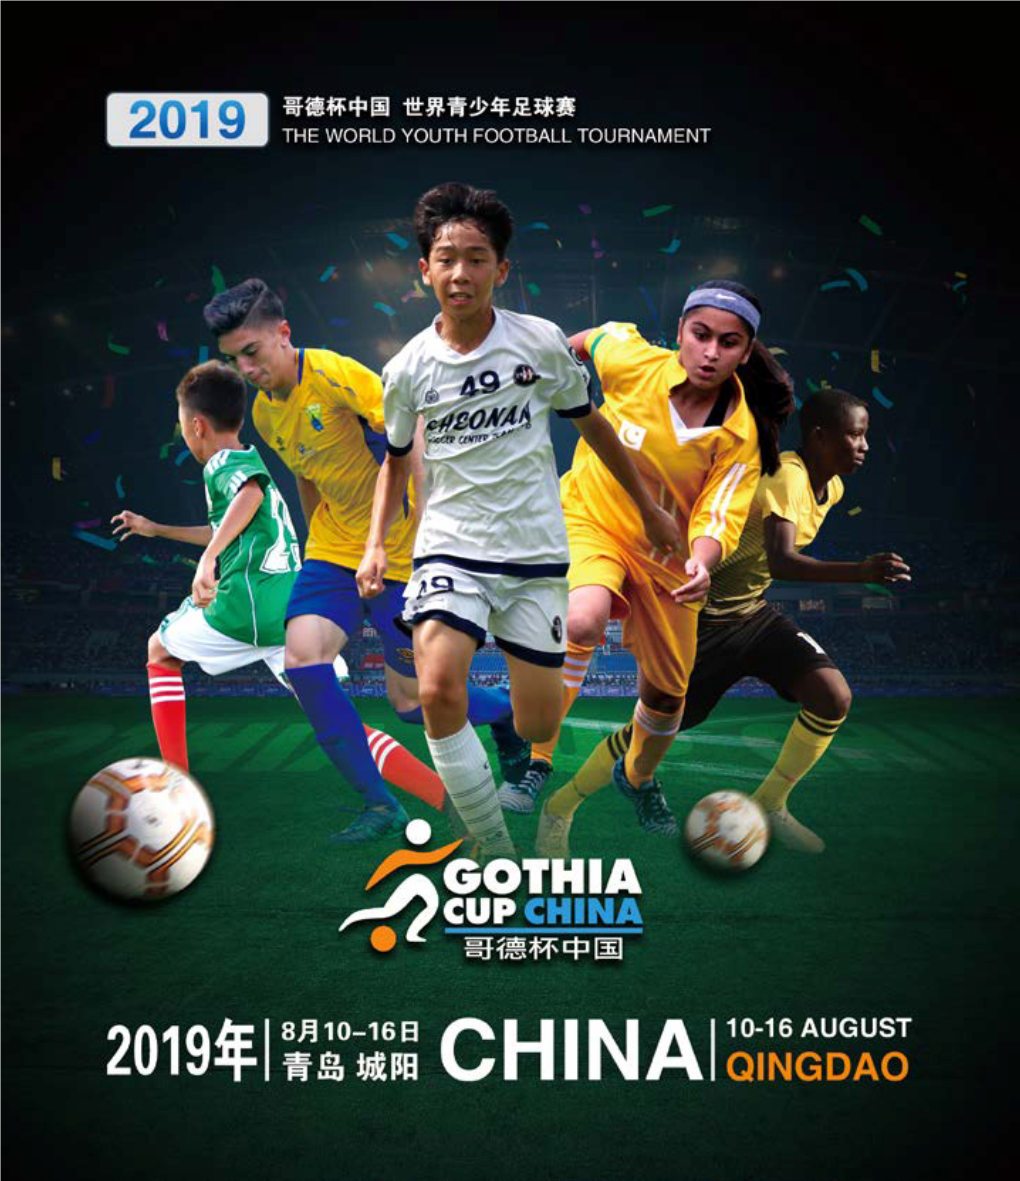 GOTHIA CUP CHINA 【哥德杯中国】 GOTHIA CUP CHINA the World Youth Football Tournament